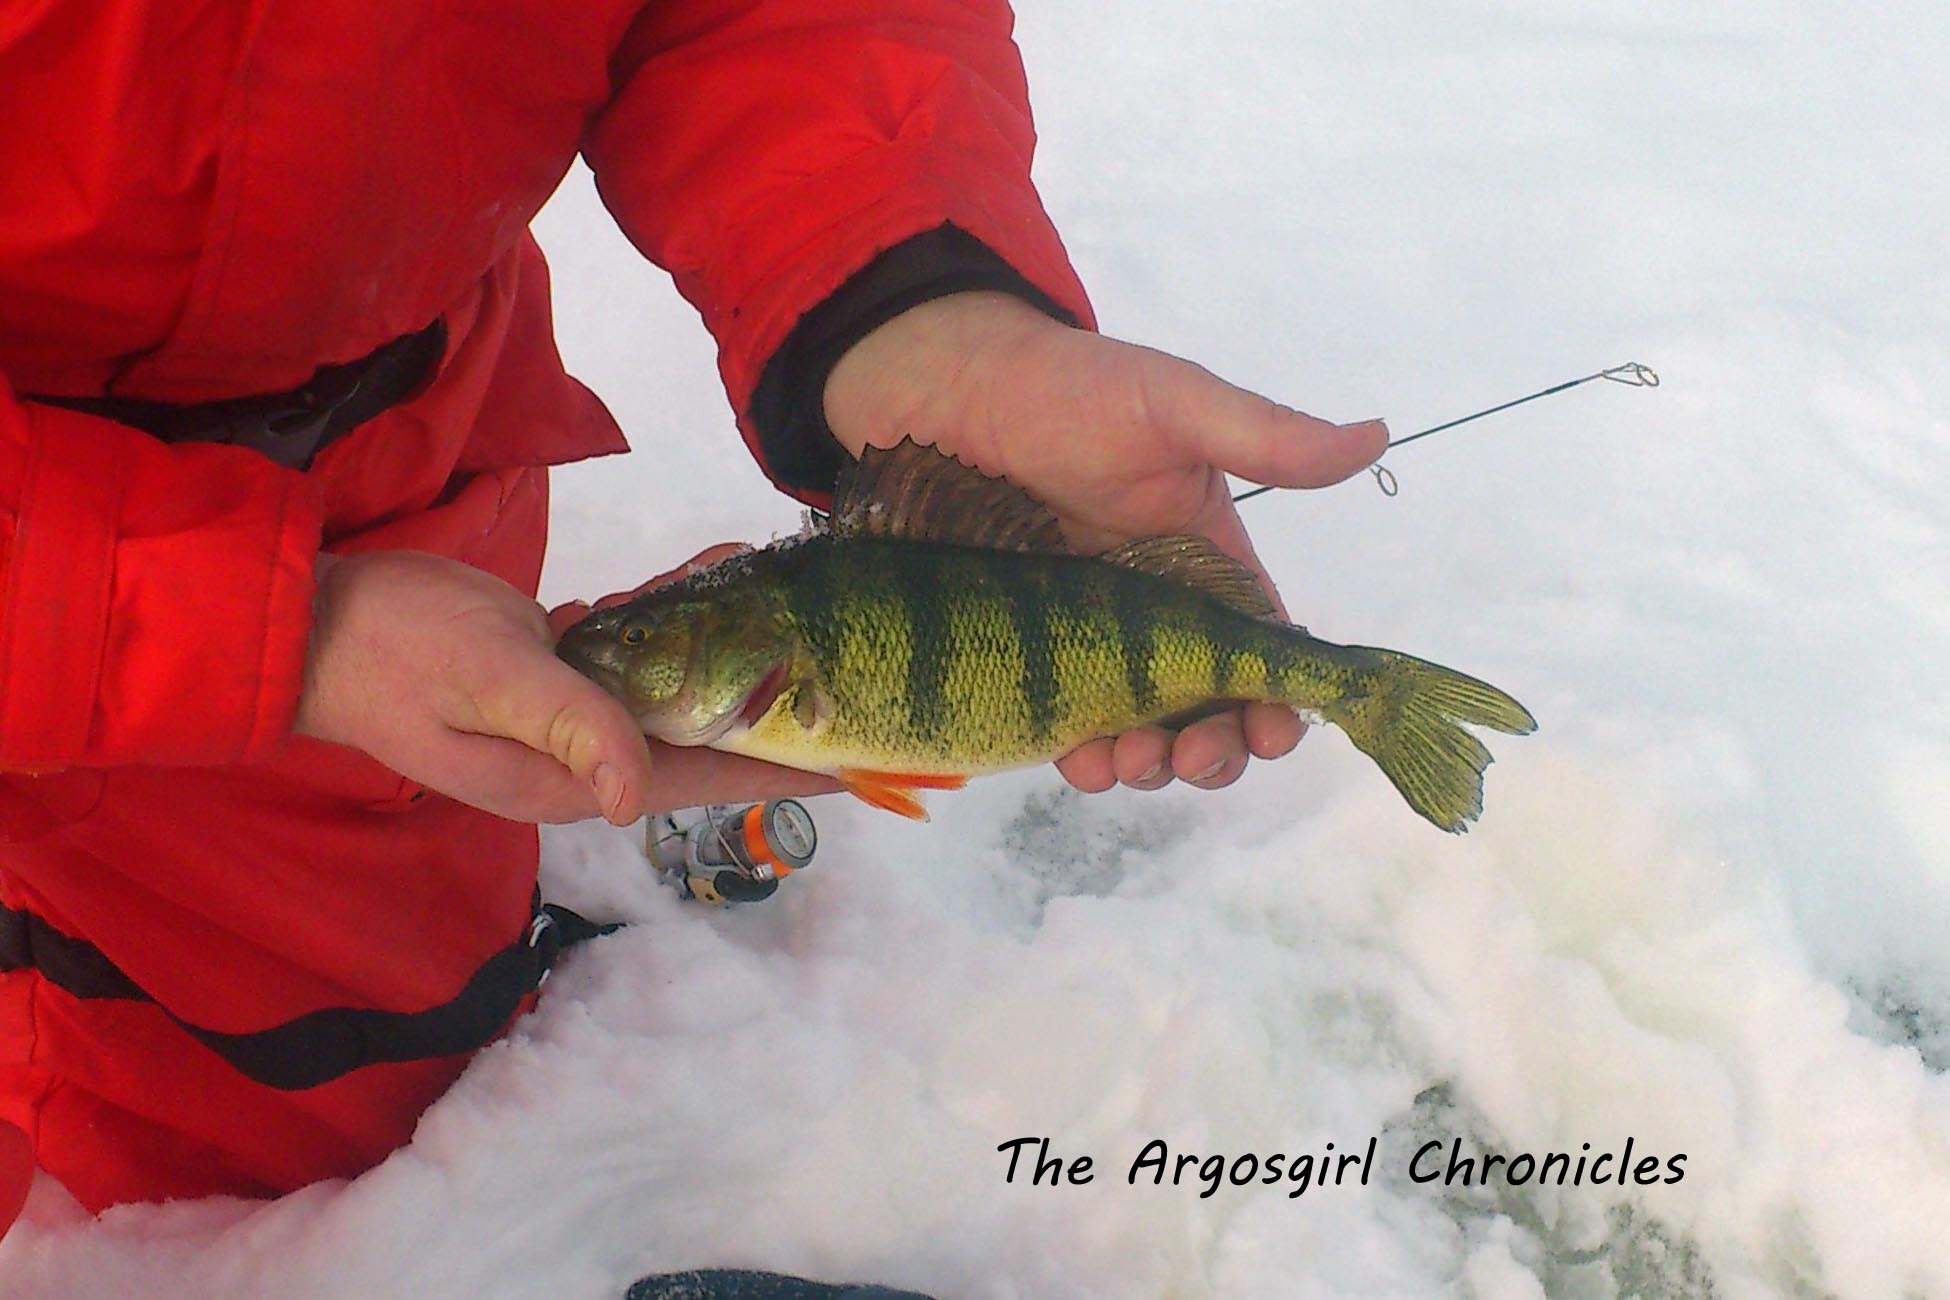 ..and getting out on some ice up north, where Darrell caught our last fish of 2012.